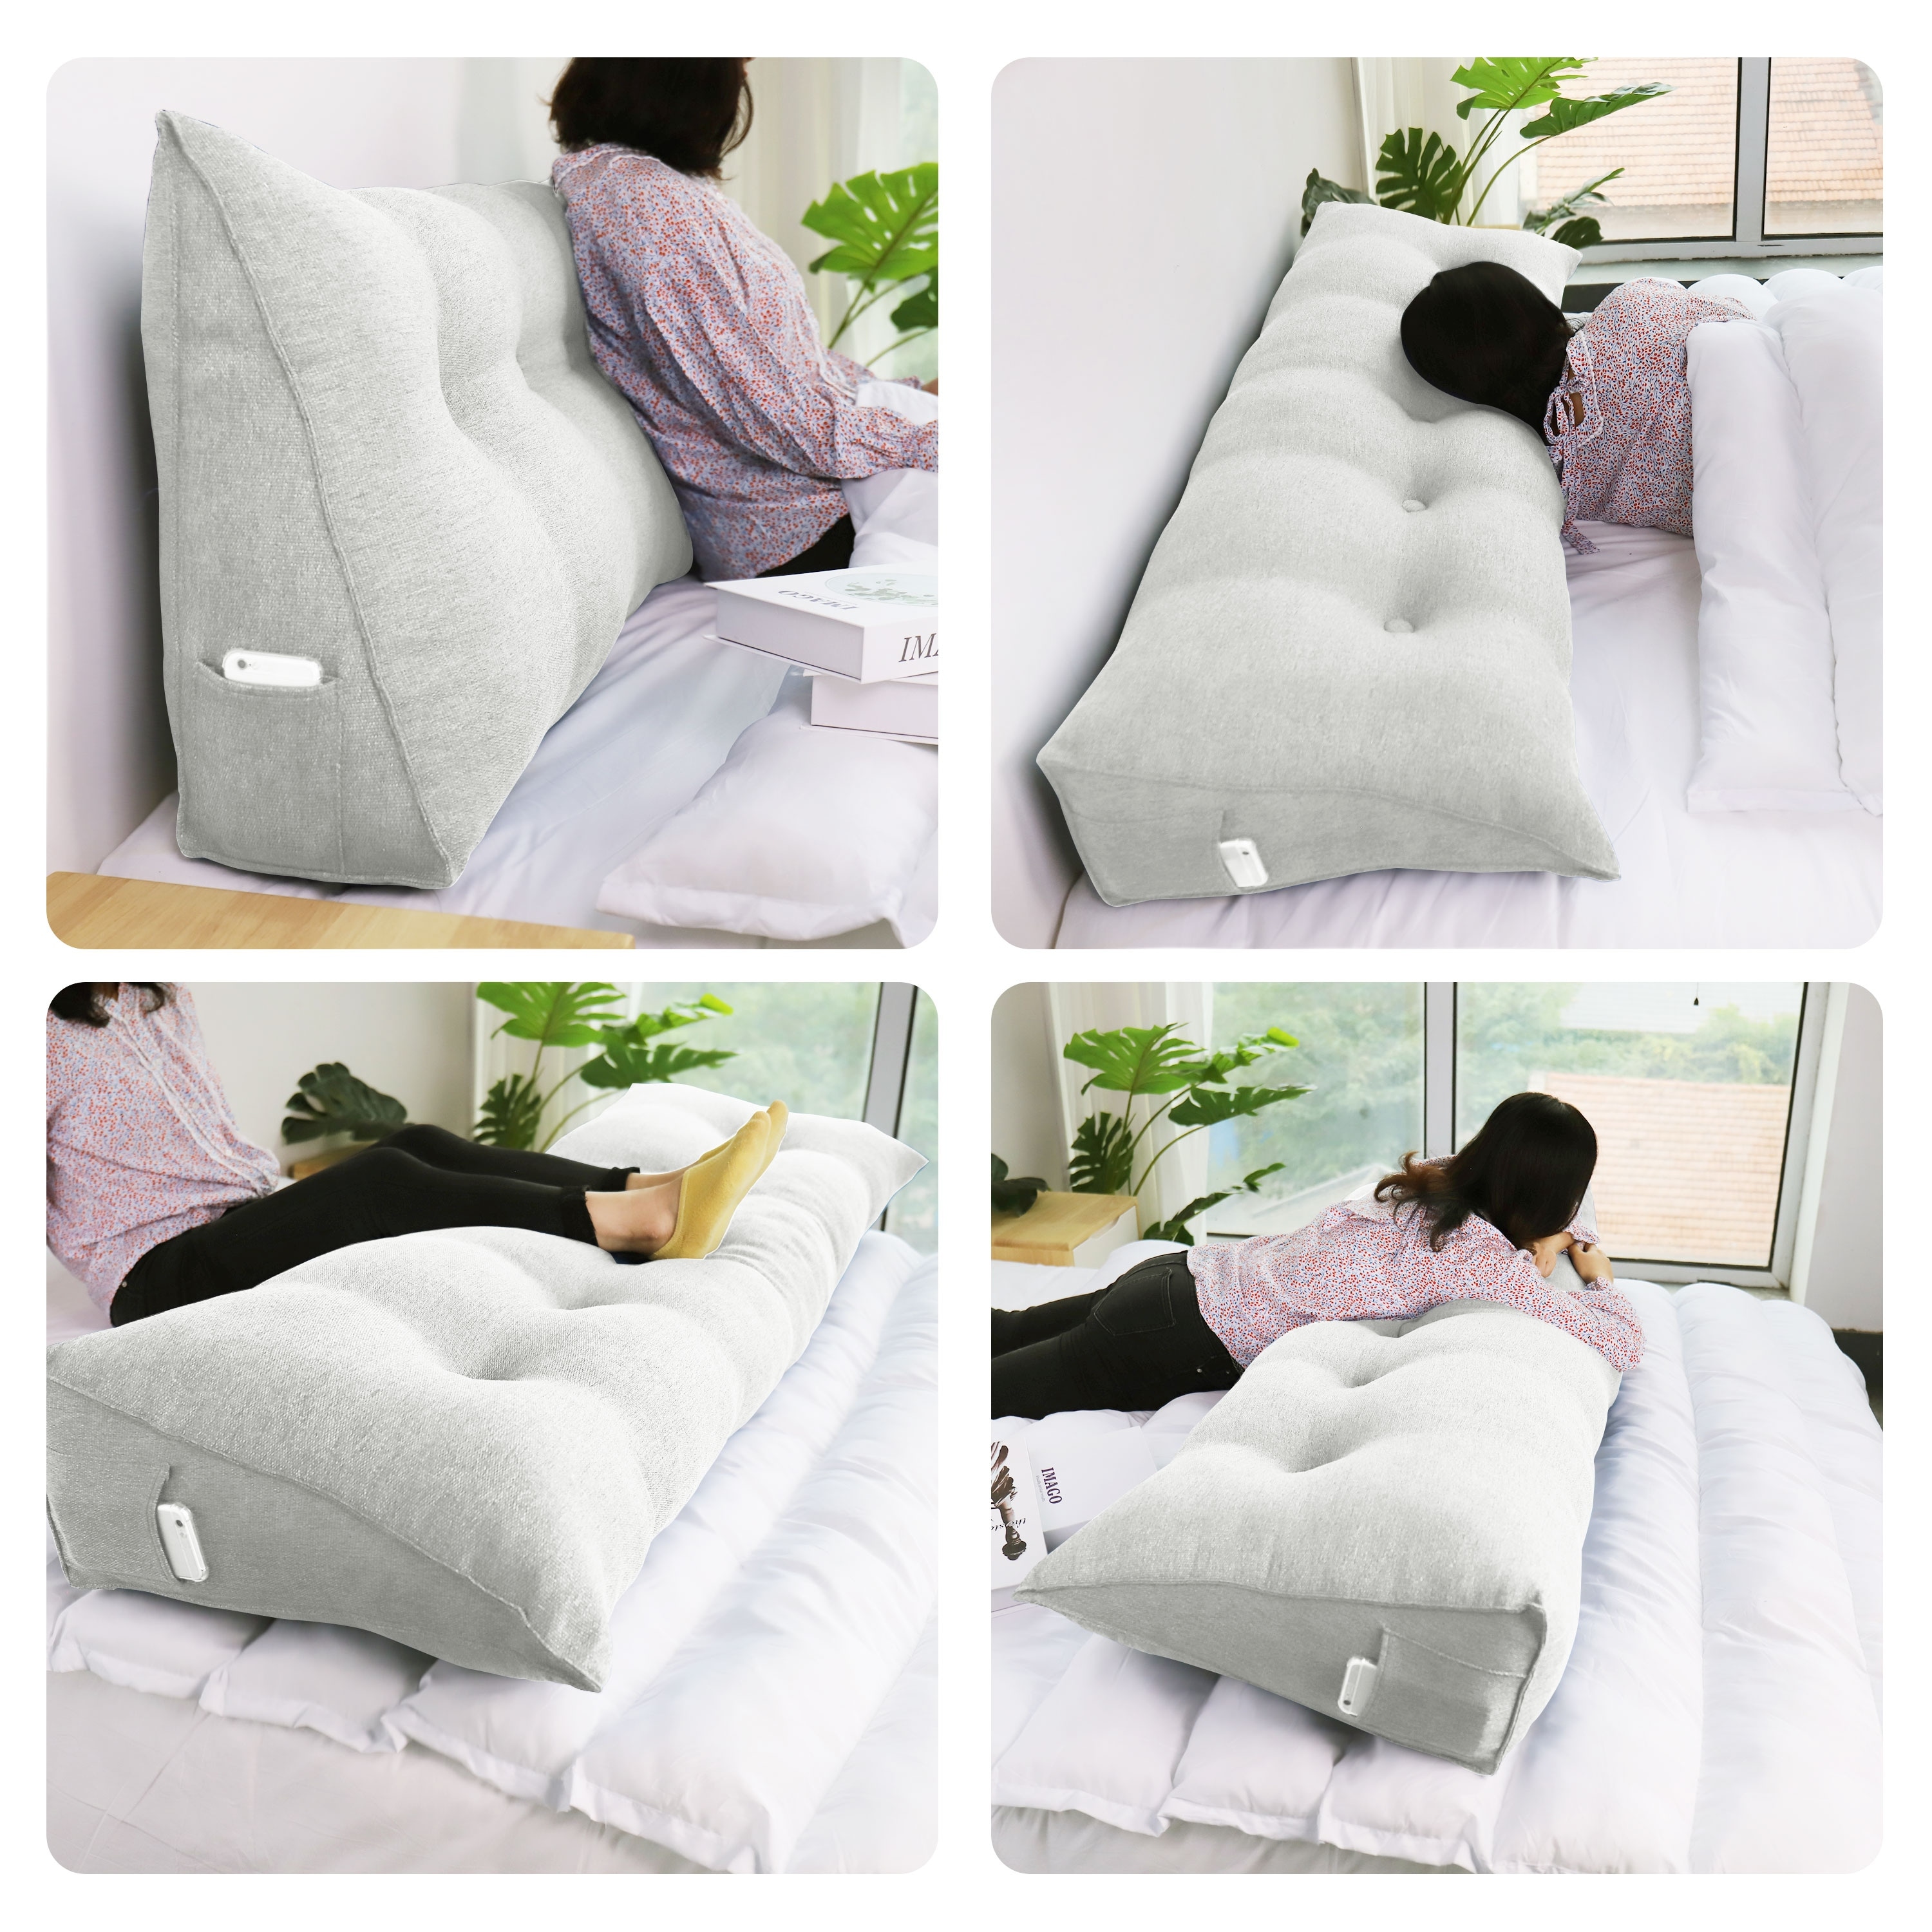 https://ak1.ostkcdn.com/images/products/is/images/direct/f388fa9f4bb98830fbdb64c0eb9e3b767911e1aa/WOWMAX-Bed-Reading-Wedge-Pillow-Back-Support-Headboard-Cushion.jpg